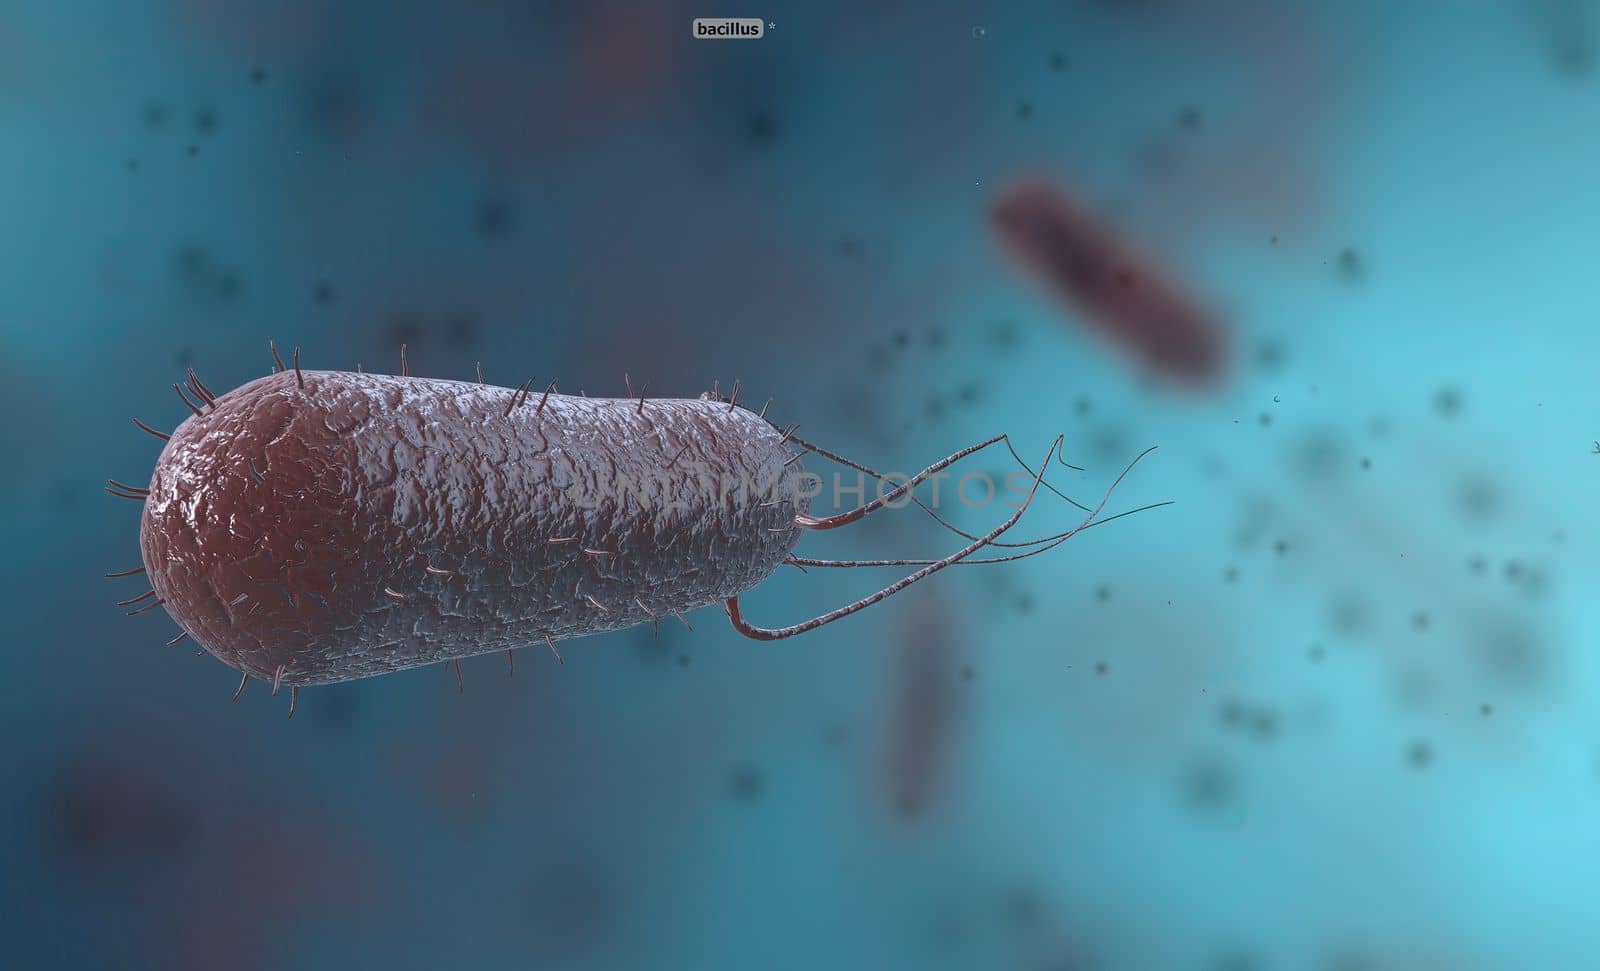 Bacillus is a gram-positive and spore-forming bacterium in the form of rods or rods. 3D illustration